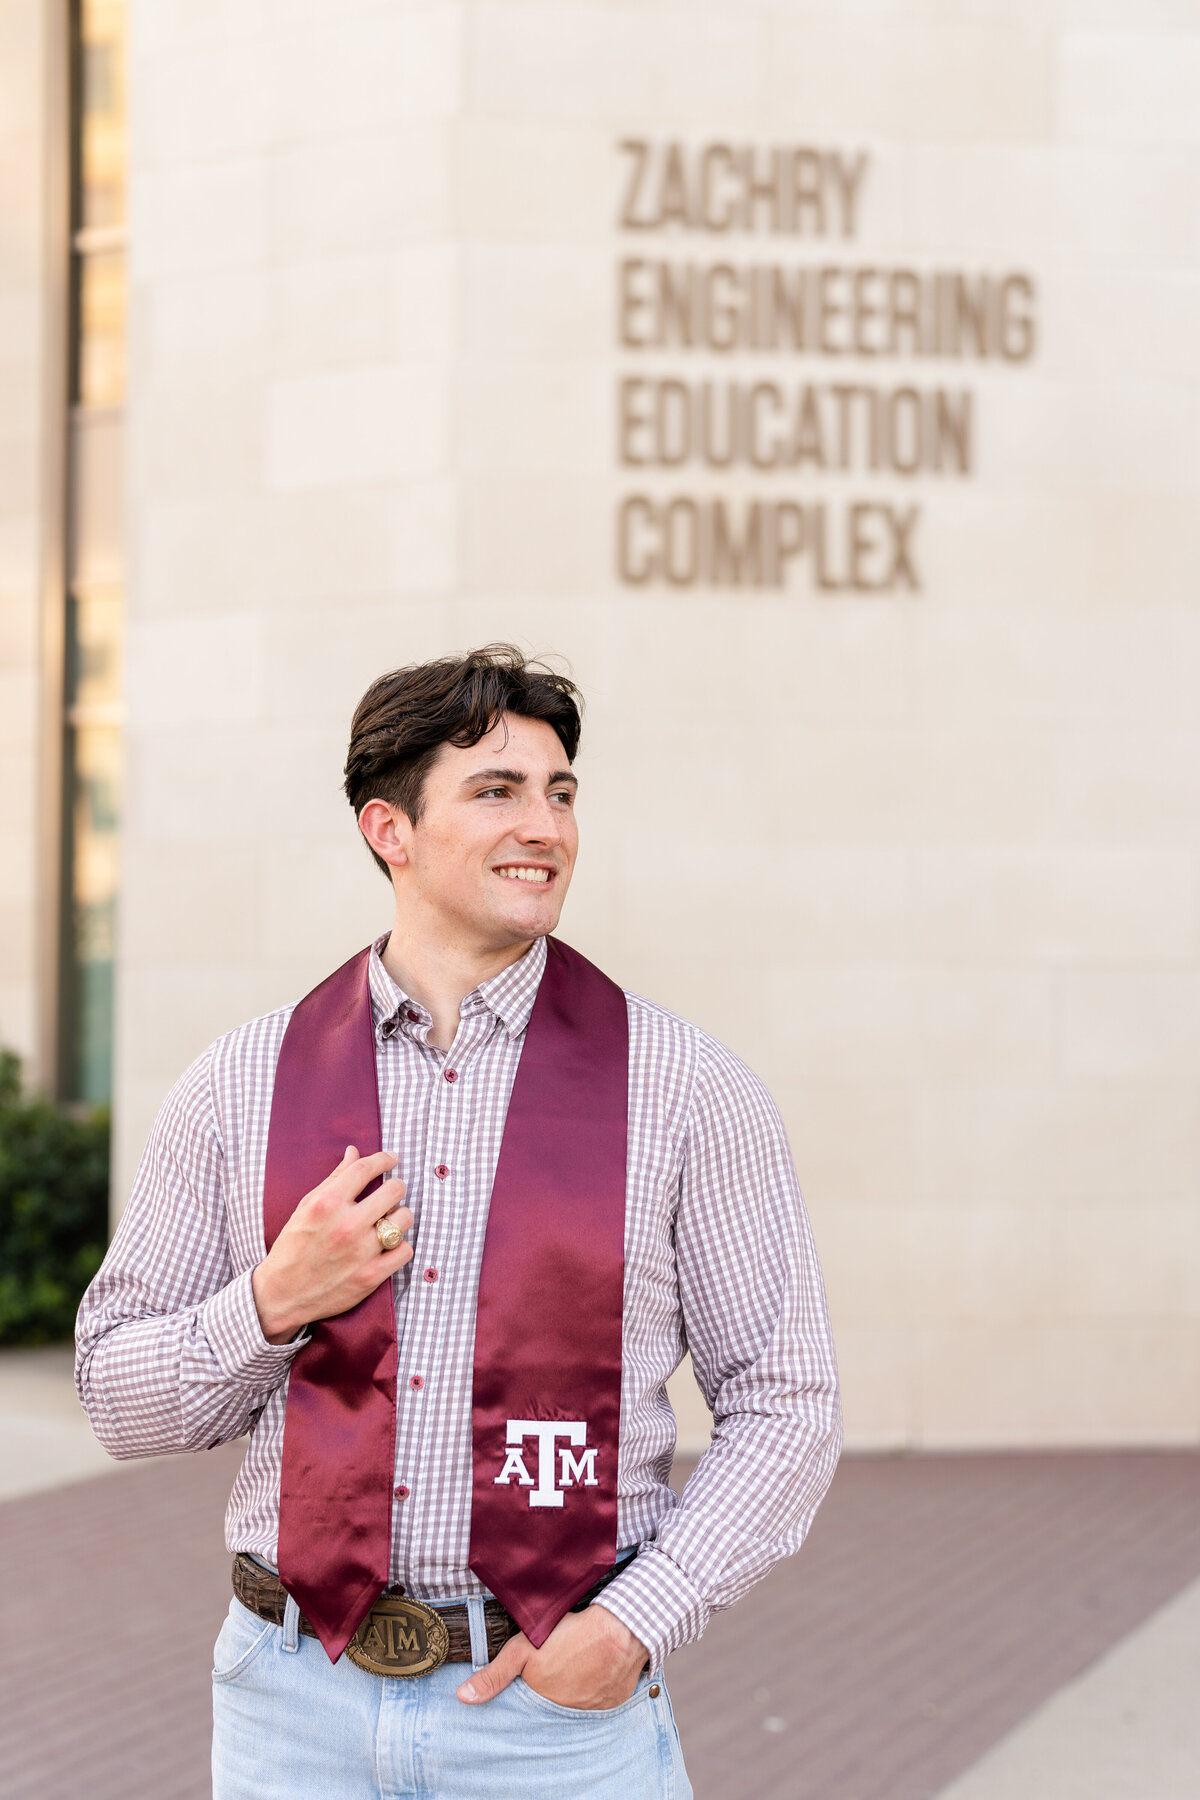 Texas A&M senior guy holding Aggie stole and smiling away while wearing jeans and button up in front of Zachry Engineering Complex